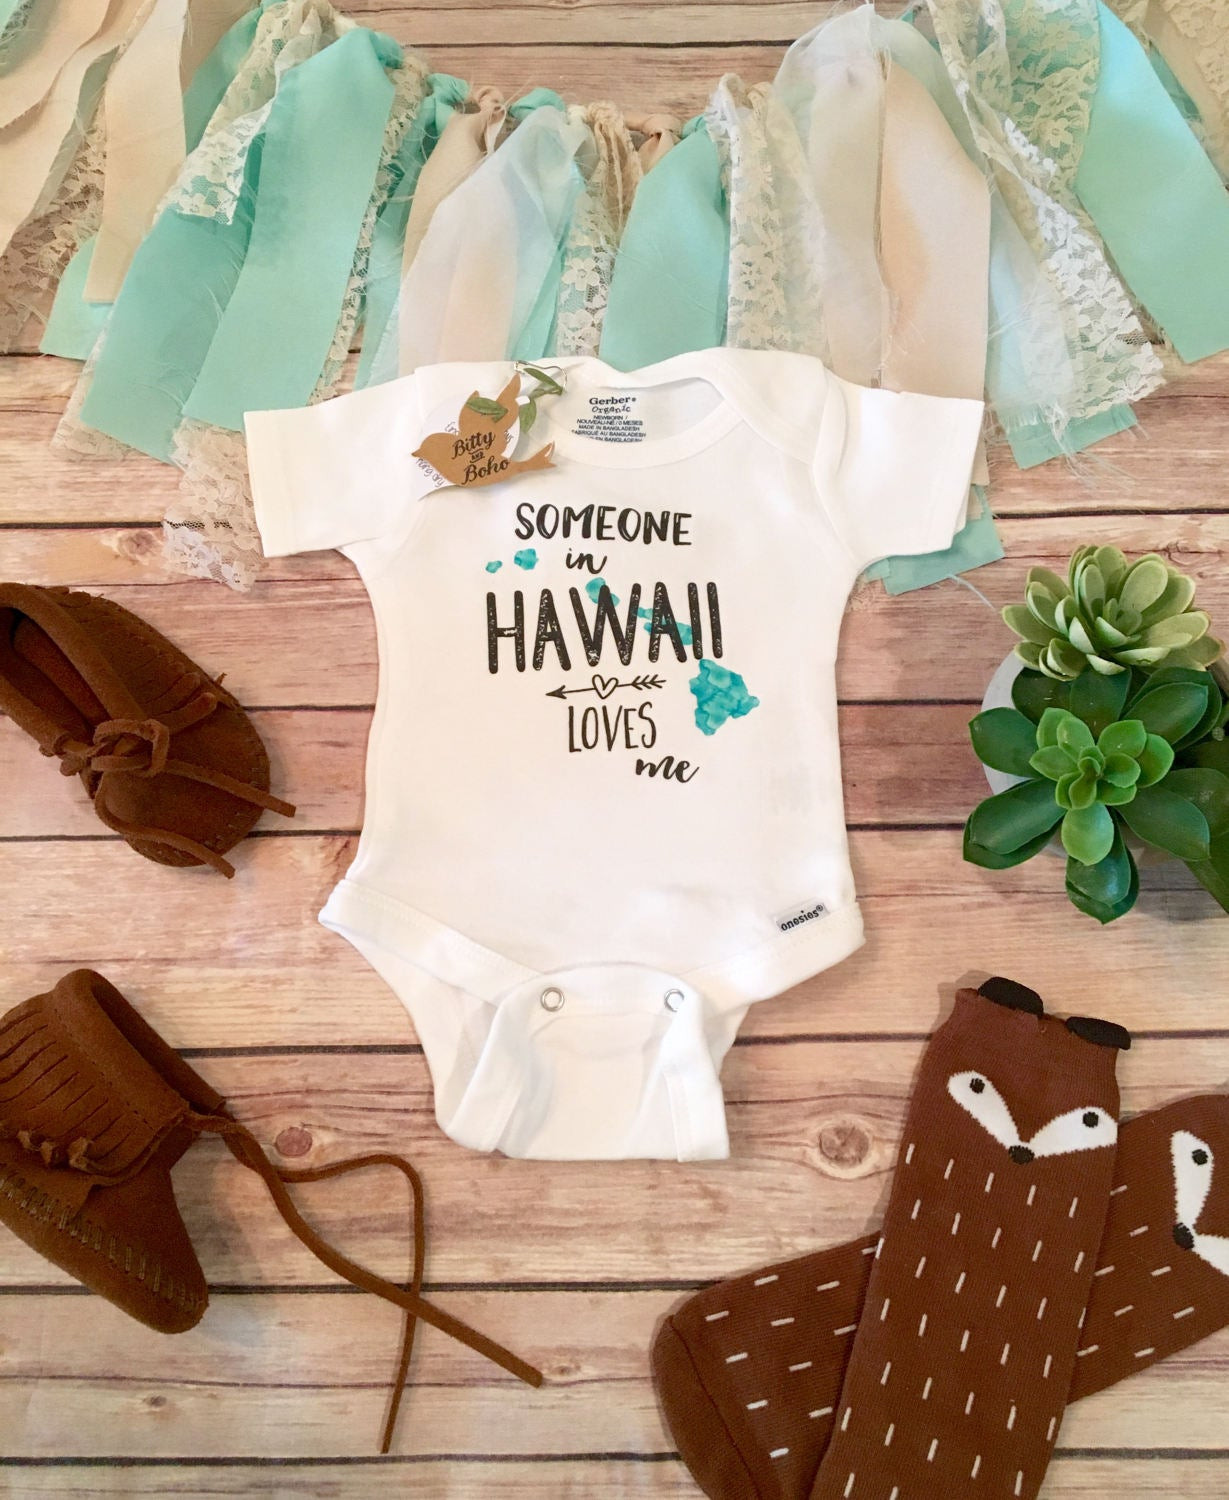 The Best Ideas for Special Baby Gifts From Grandma – Home, Family ...